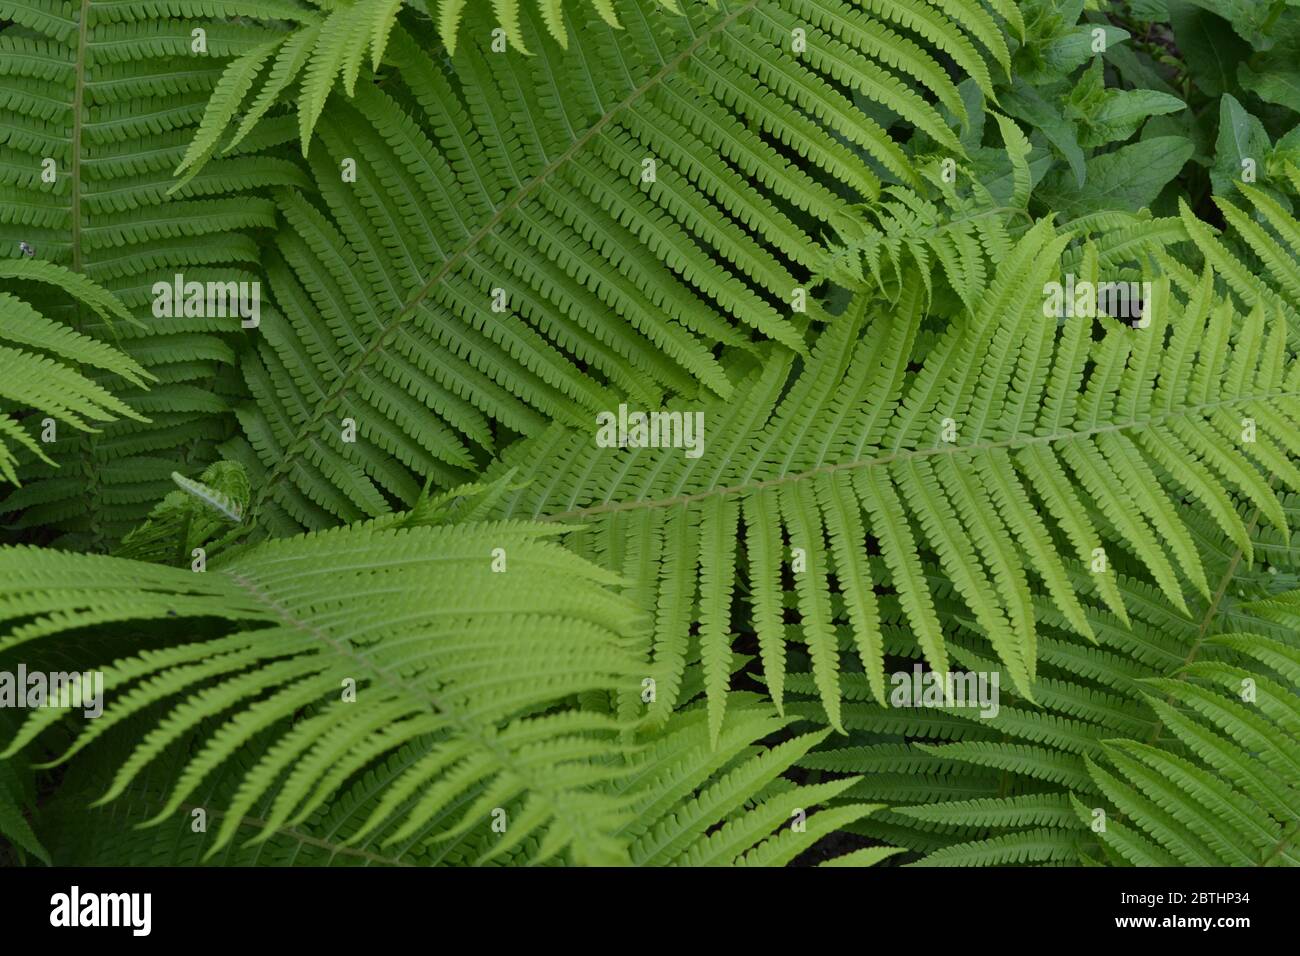 Home garden, flower bed. House, field. Gardening. Green leaves, bushes. Decoration flower beds, beautiful curls. Fern. Polypodiophyta. Fern Leaf - Fro Stock Photo